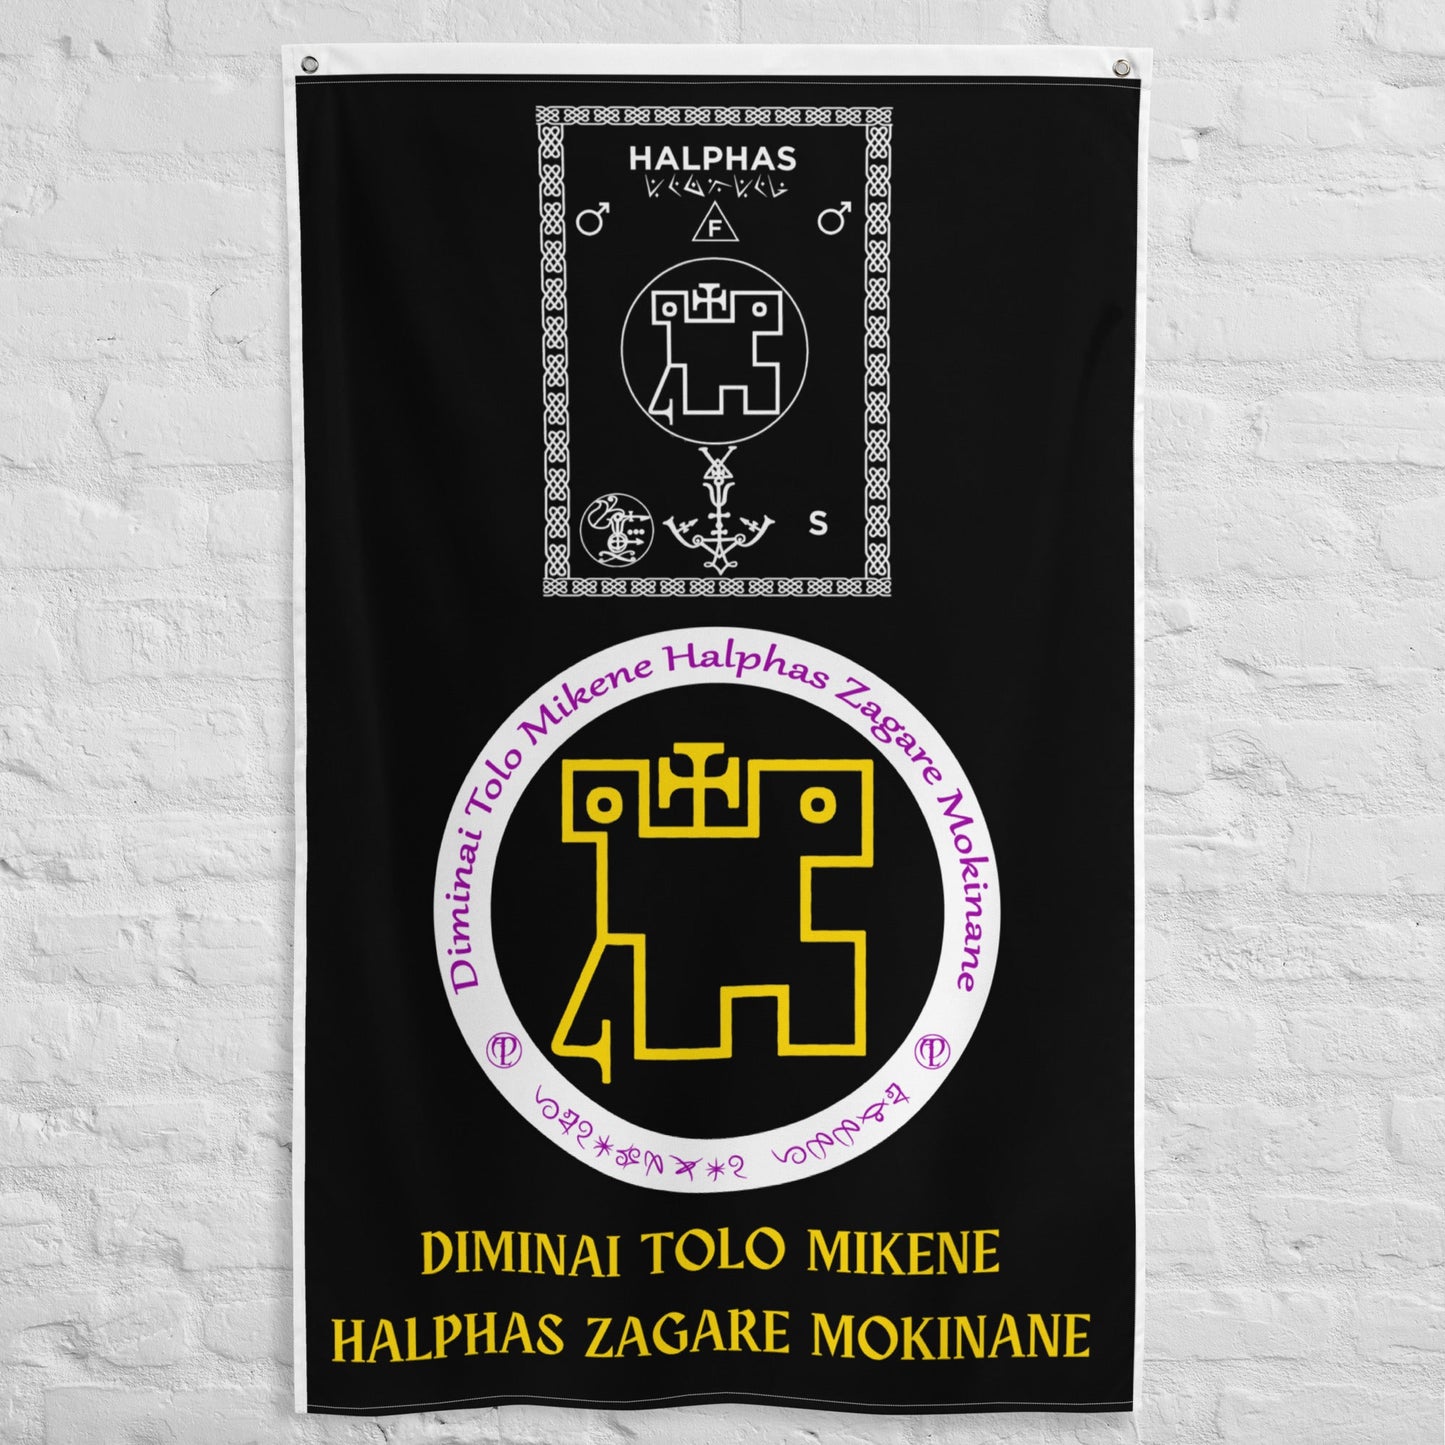 Attunement-Invocation-Flag-of-Spirit-Halphas-To-make-inyong-attunement-and-invocations-sayon-ug-paspas